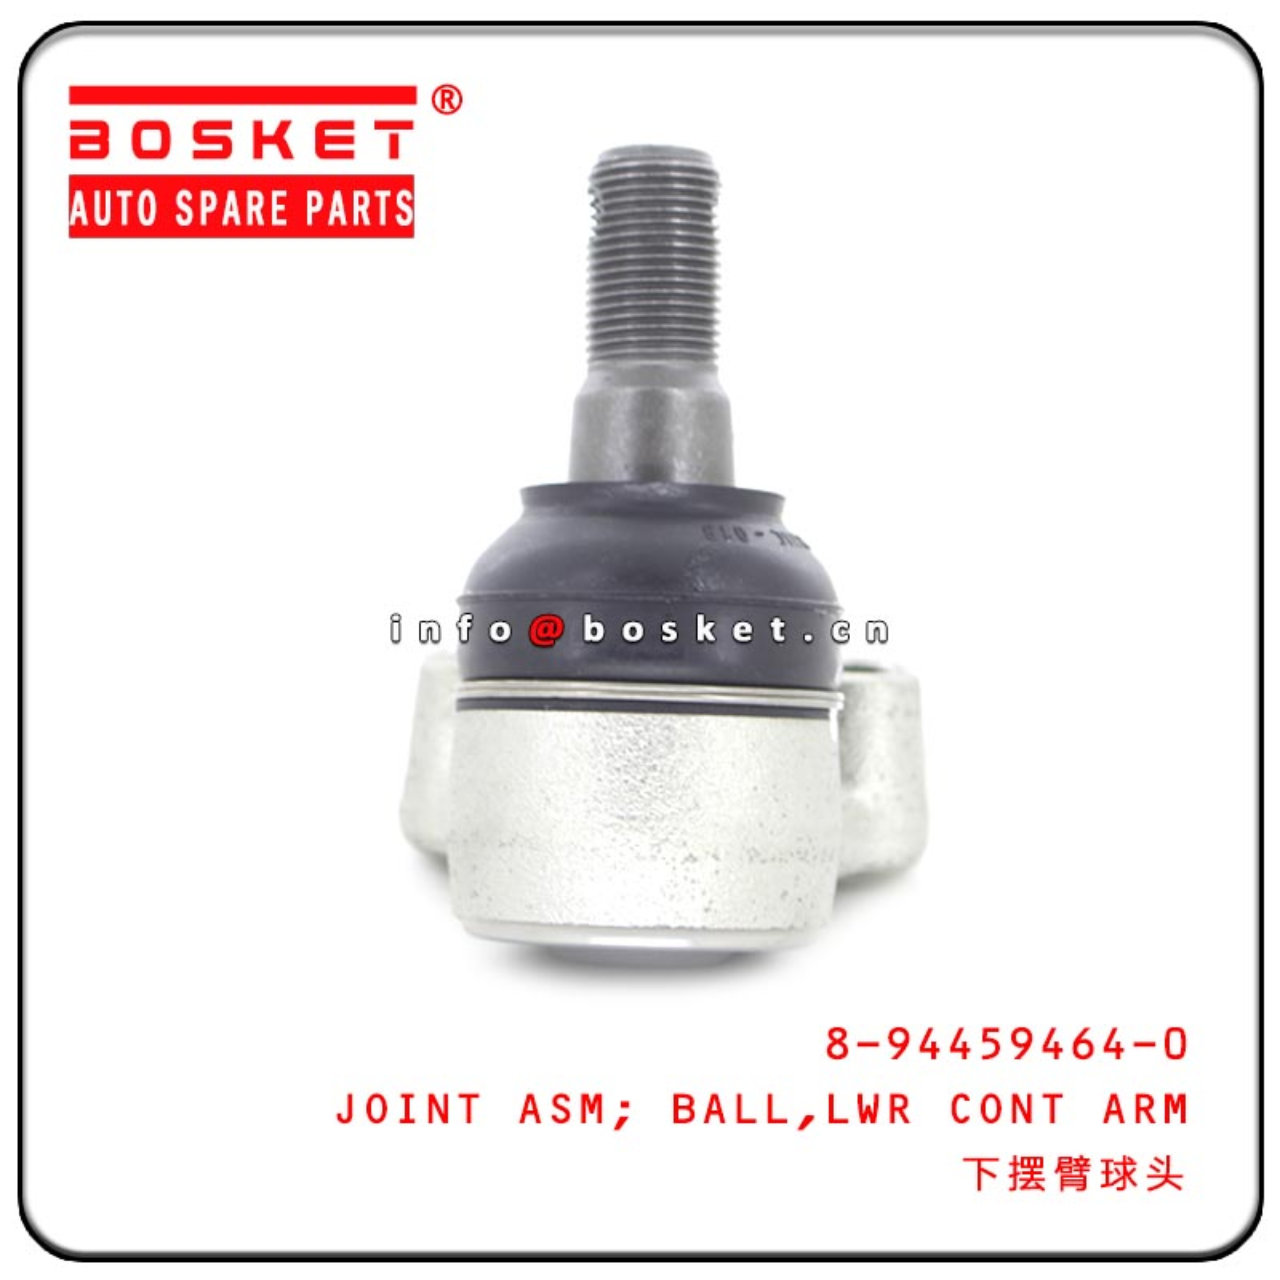 8-94459464-0 8944594640 Lower Control Arm Ball Joint Assembly Suitable For ISUZU4JA1 TFR54